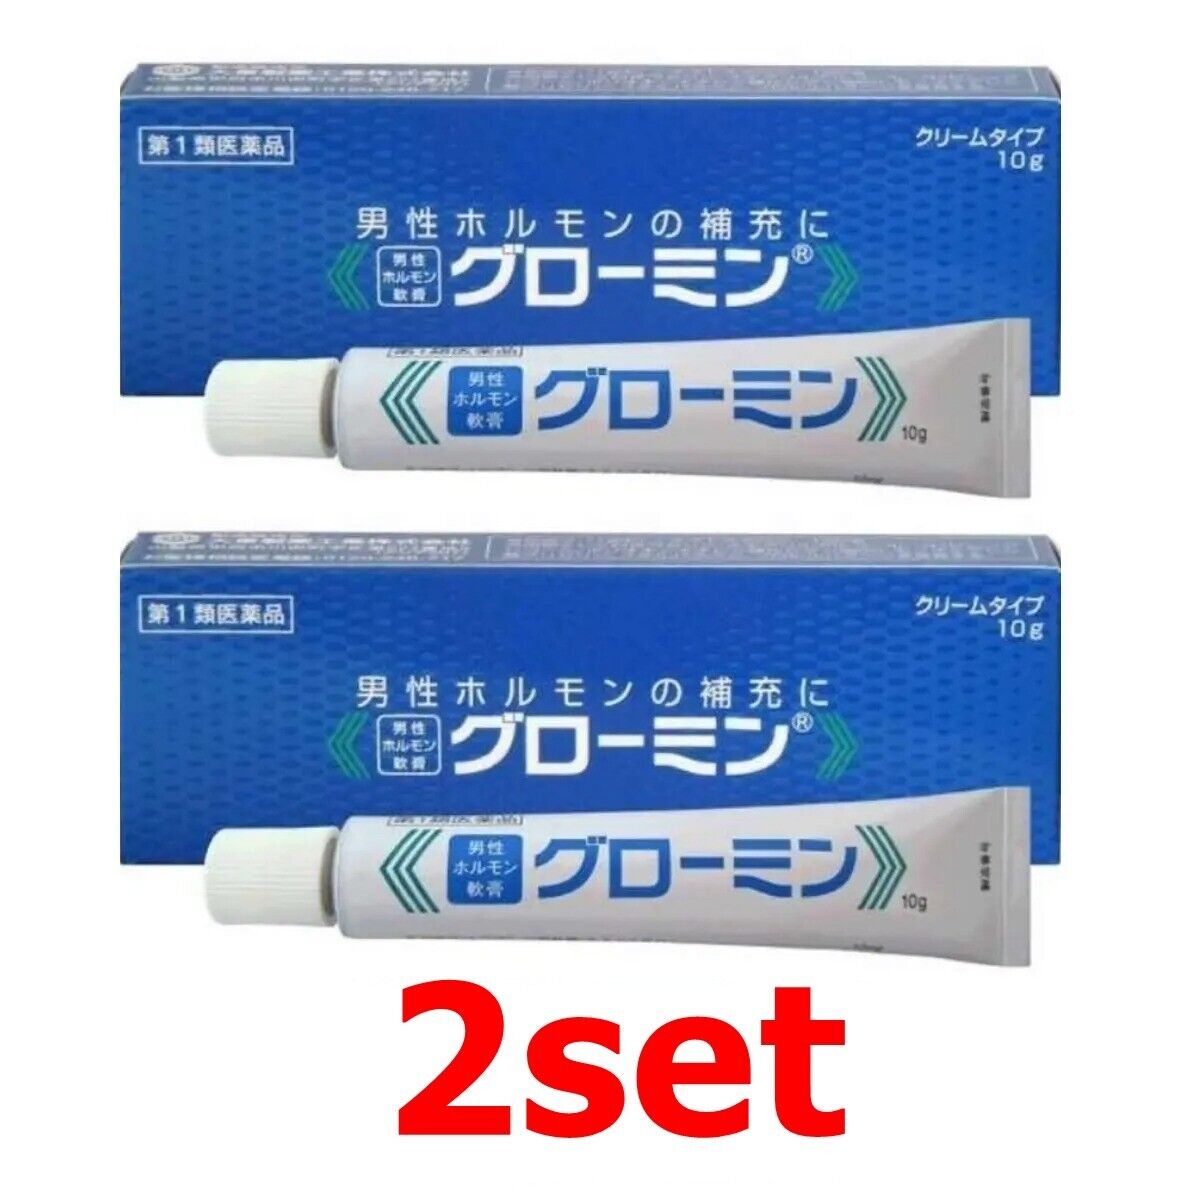 Guromin Testosterone 10mg Creme Type Male Hormone Medical Cream set of 2 Japan